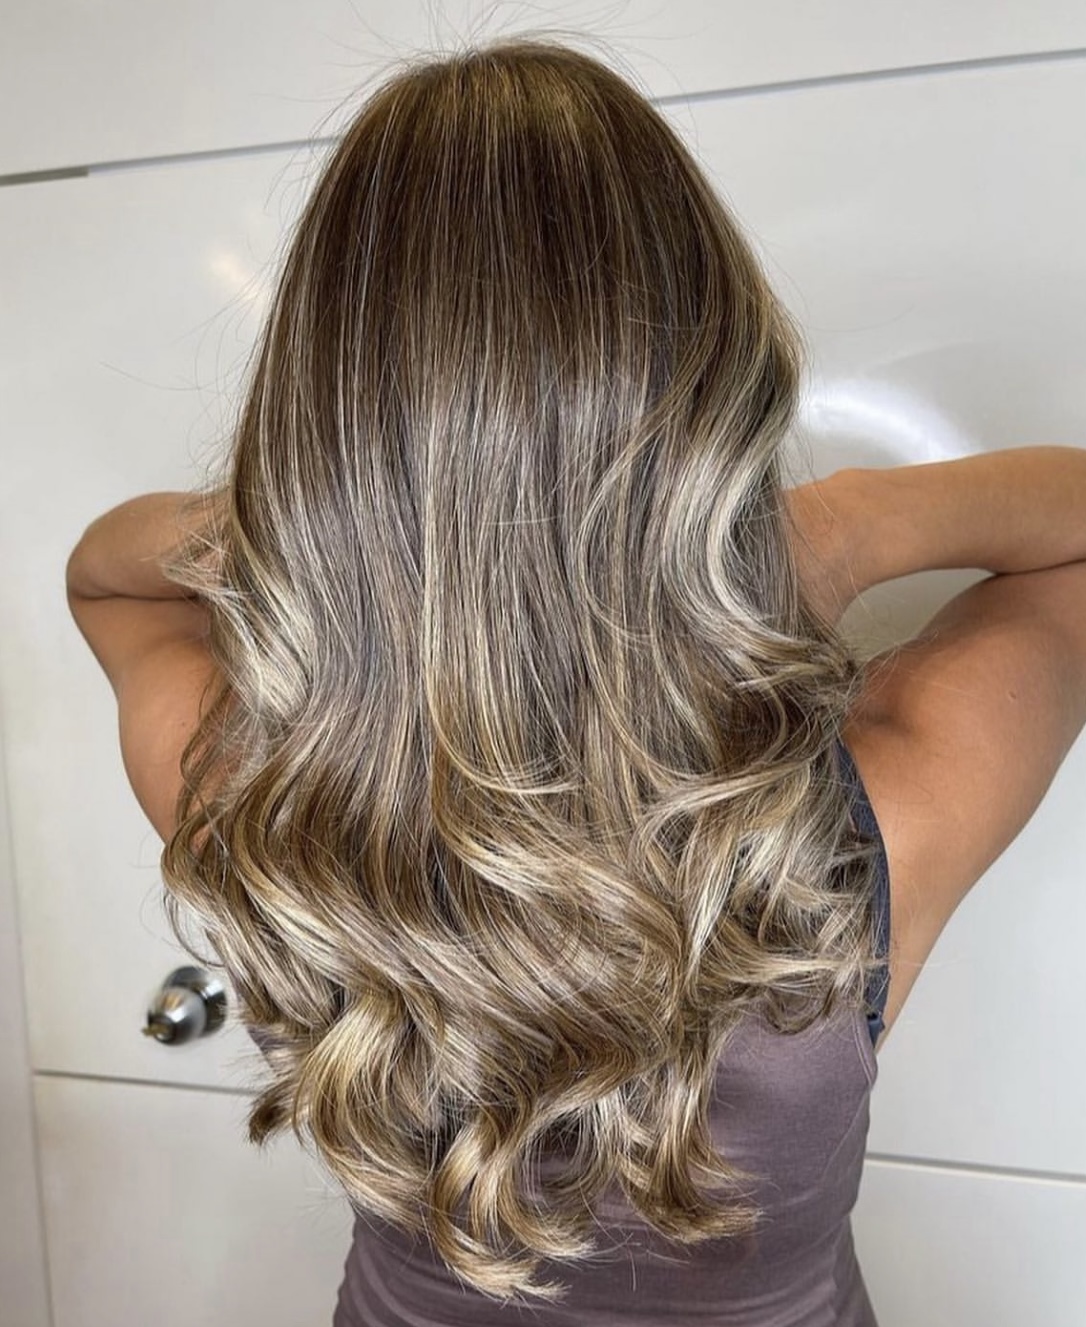 Where to get Airtouch Balayage in Winter Park? - Hair Salon Orlando, Best  Hair Salons Winter Park, FL